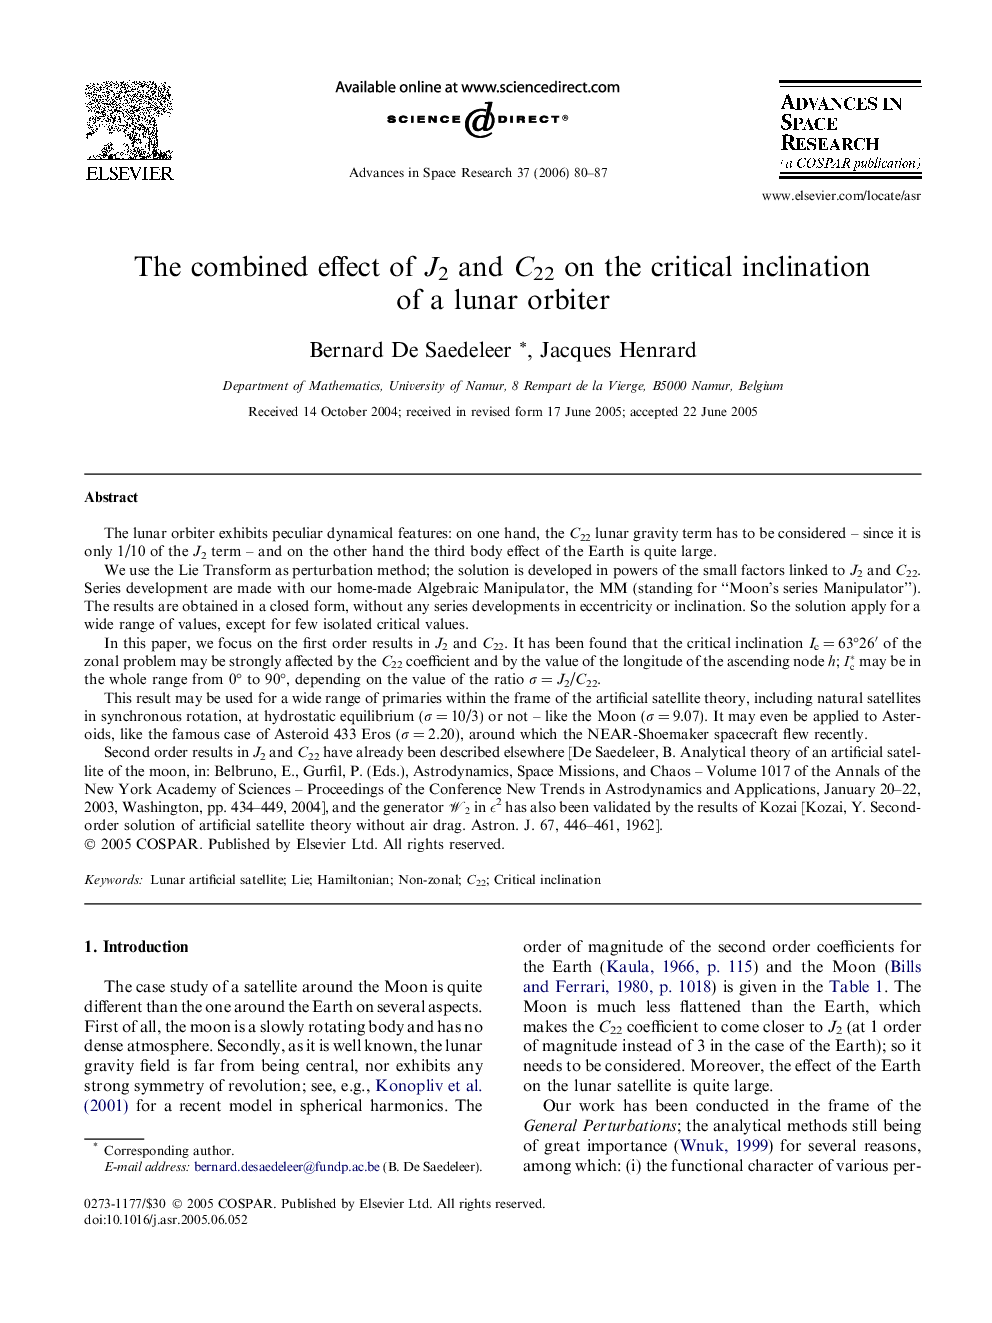 The combined effect of J2 and C22 on the critical inclination of a lunar orbiter